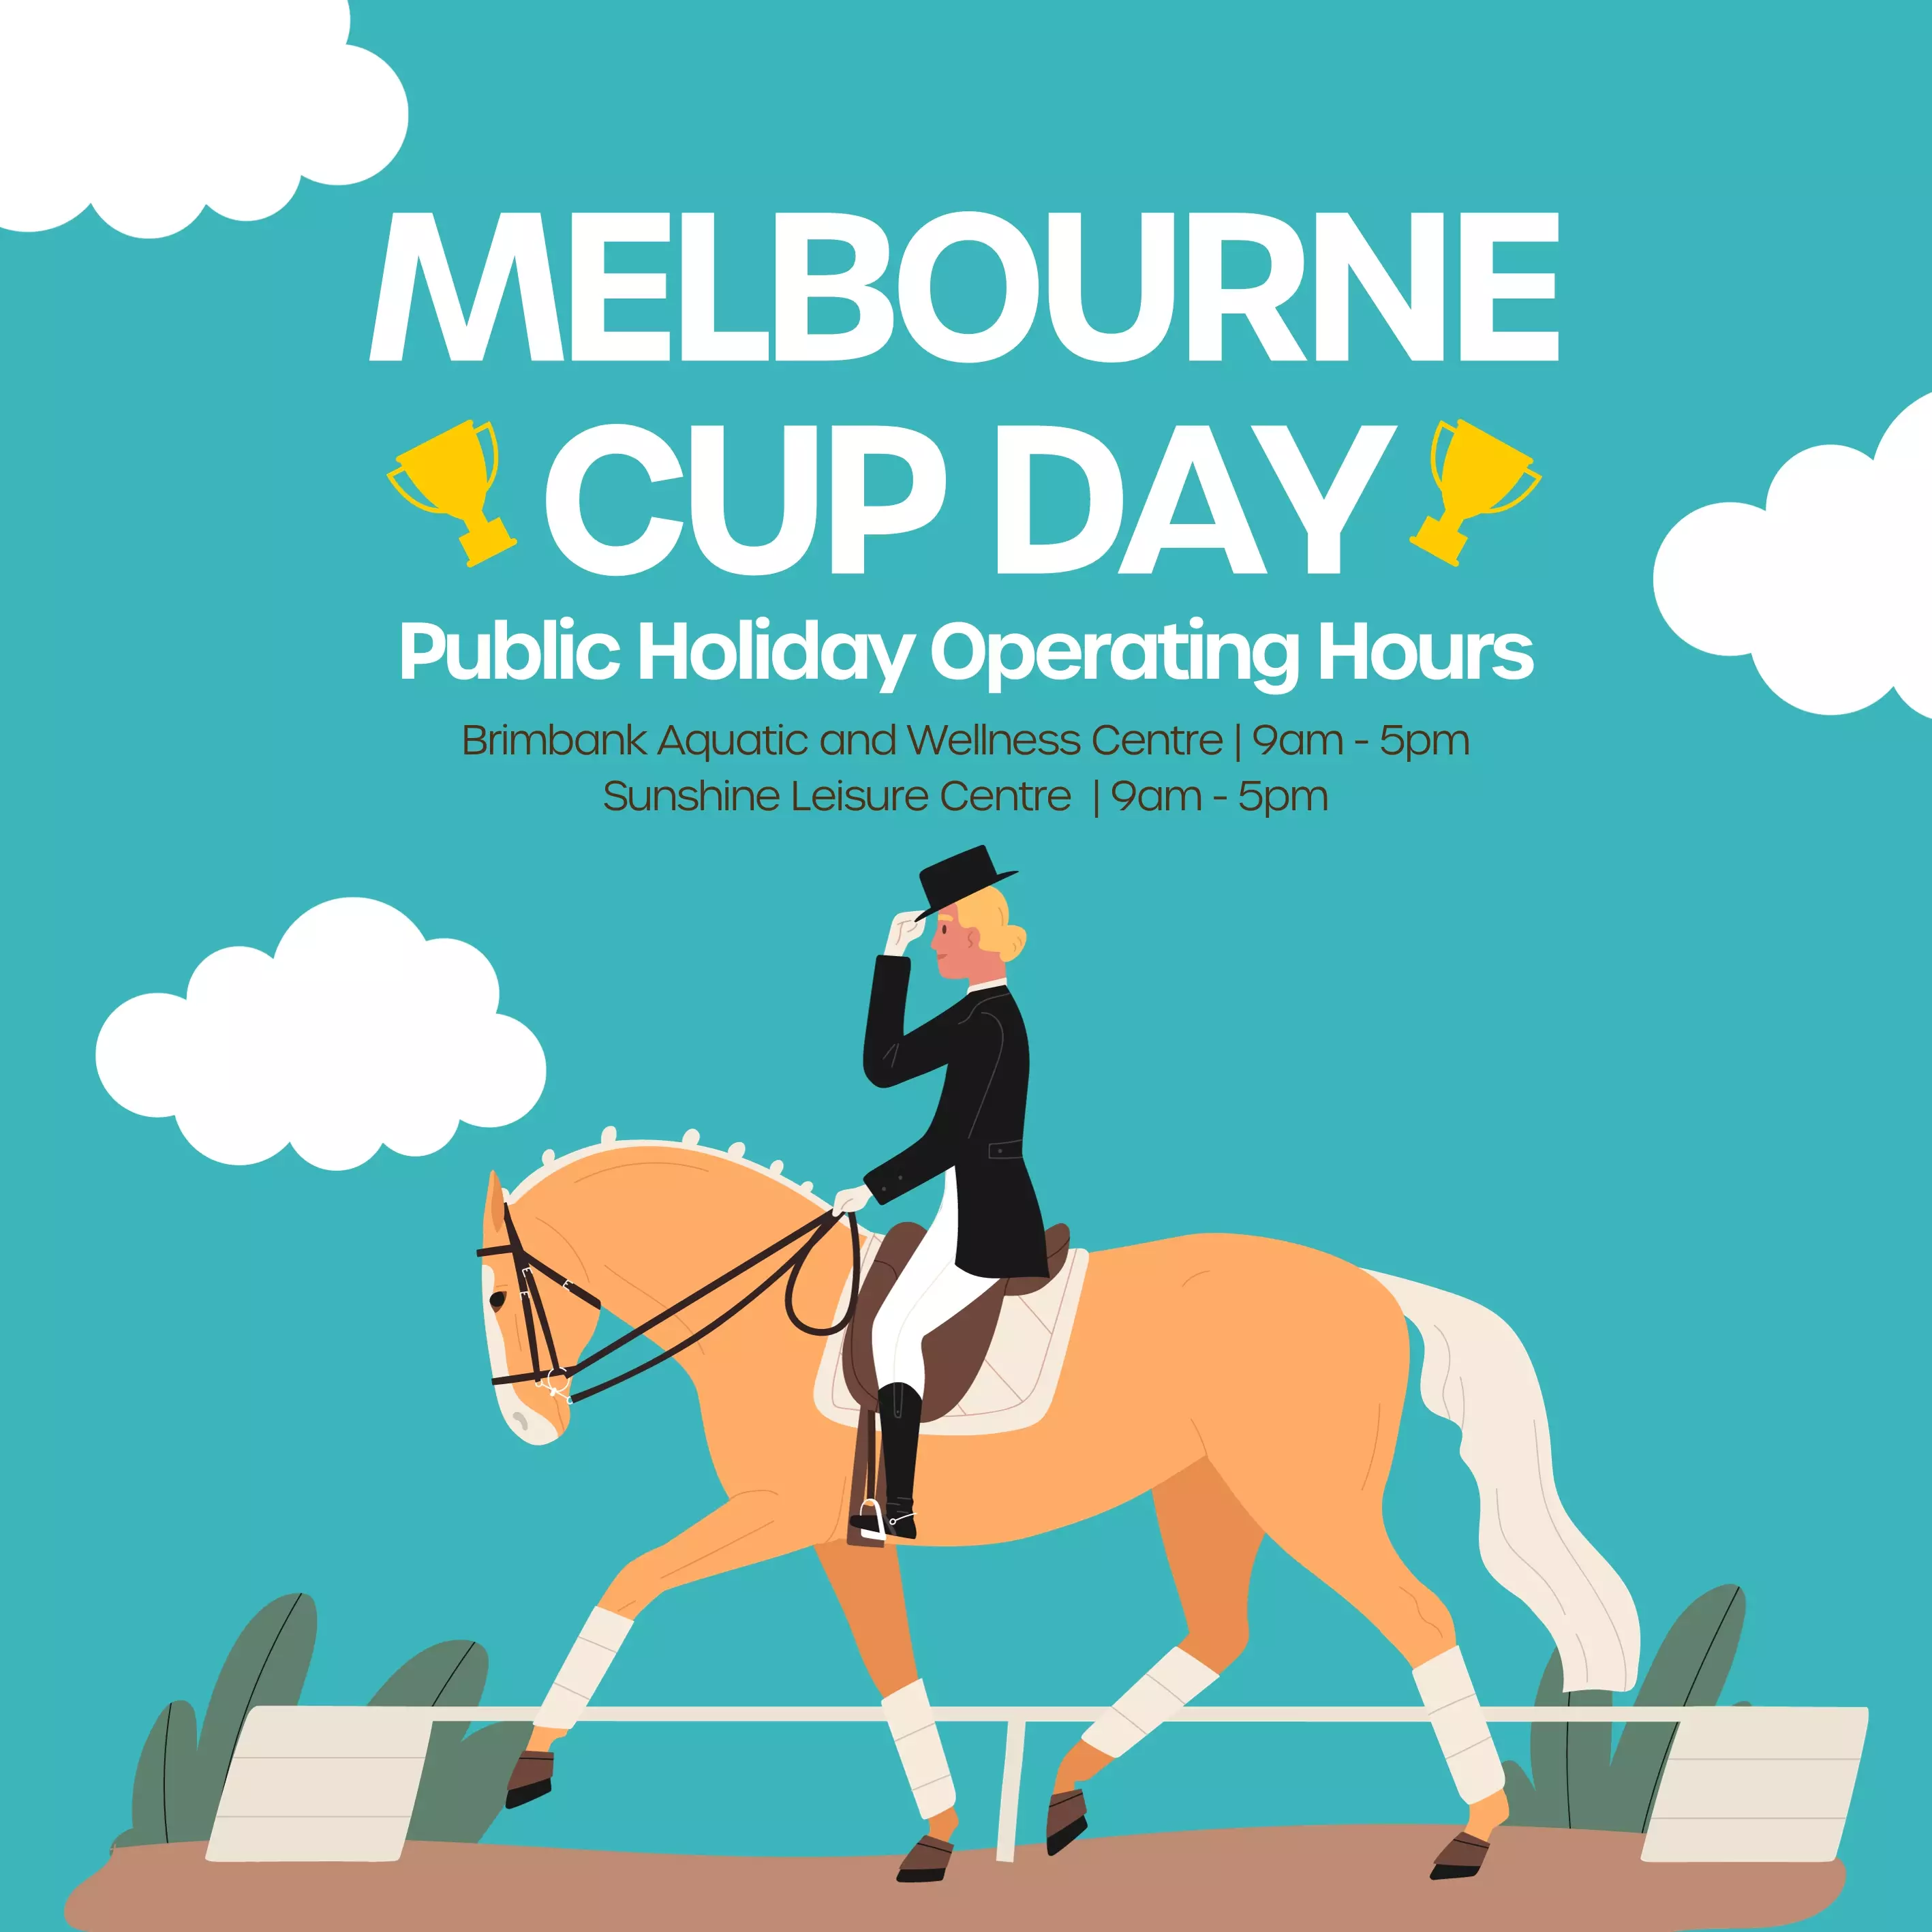 Melbourne Cup Public Holiday Operating Hours